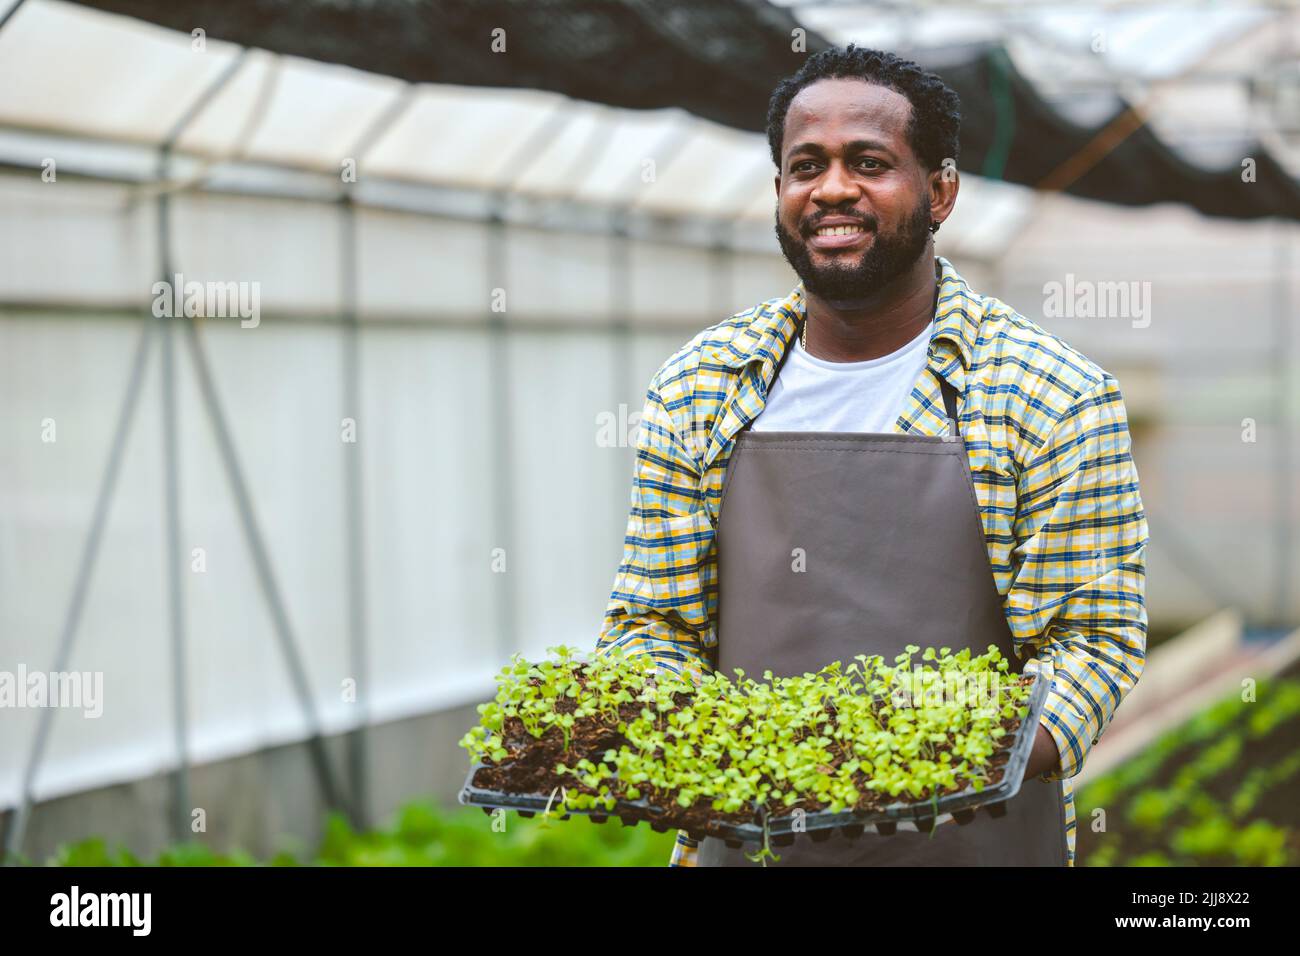 African farmer showing baby plant at organic greenhouse nursery Agriculture farm and happy with vegetable farming business. Stock Photo